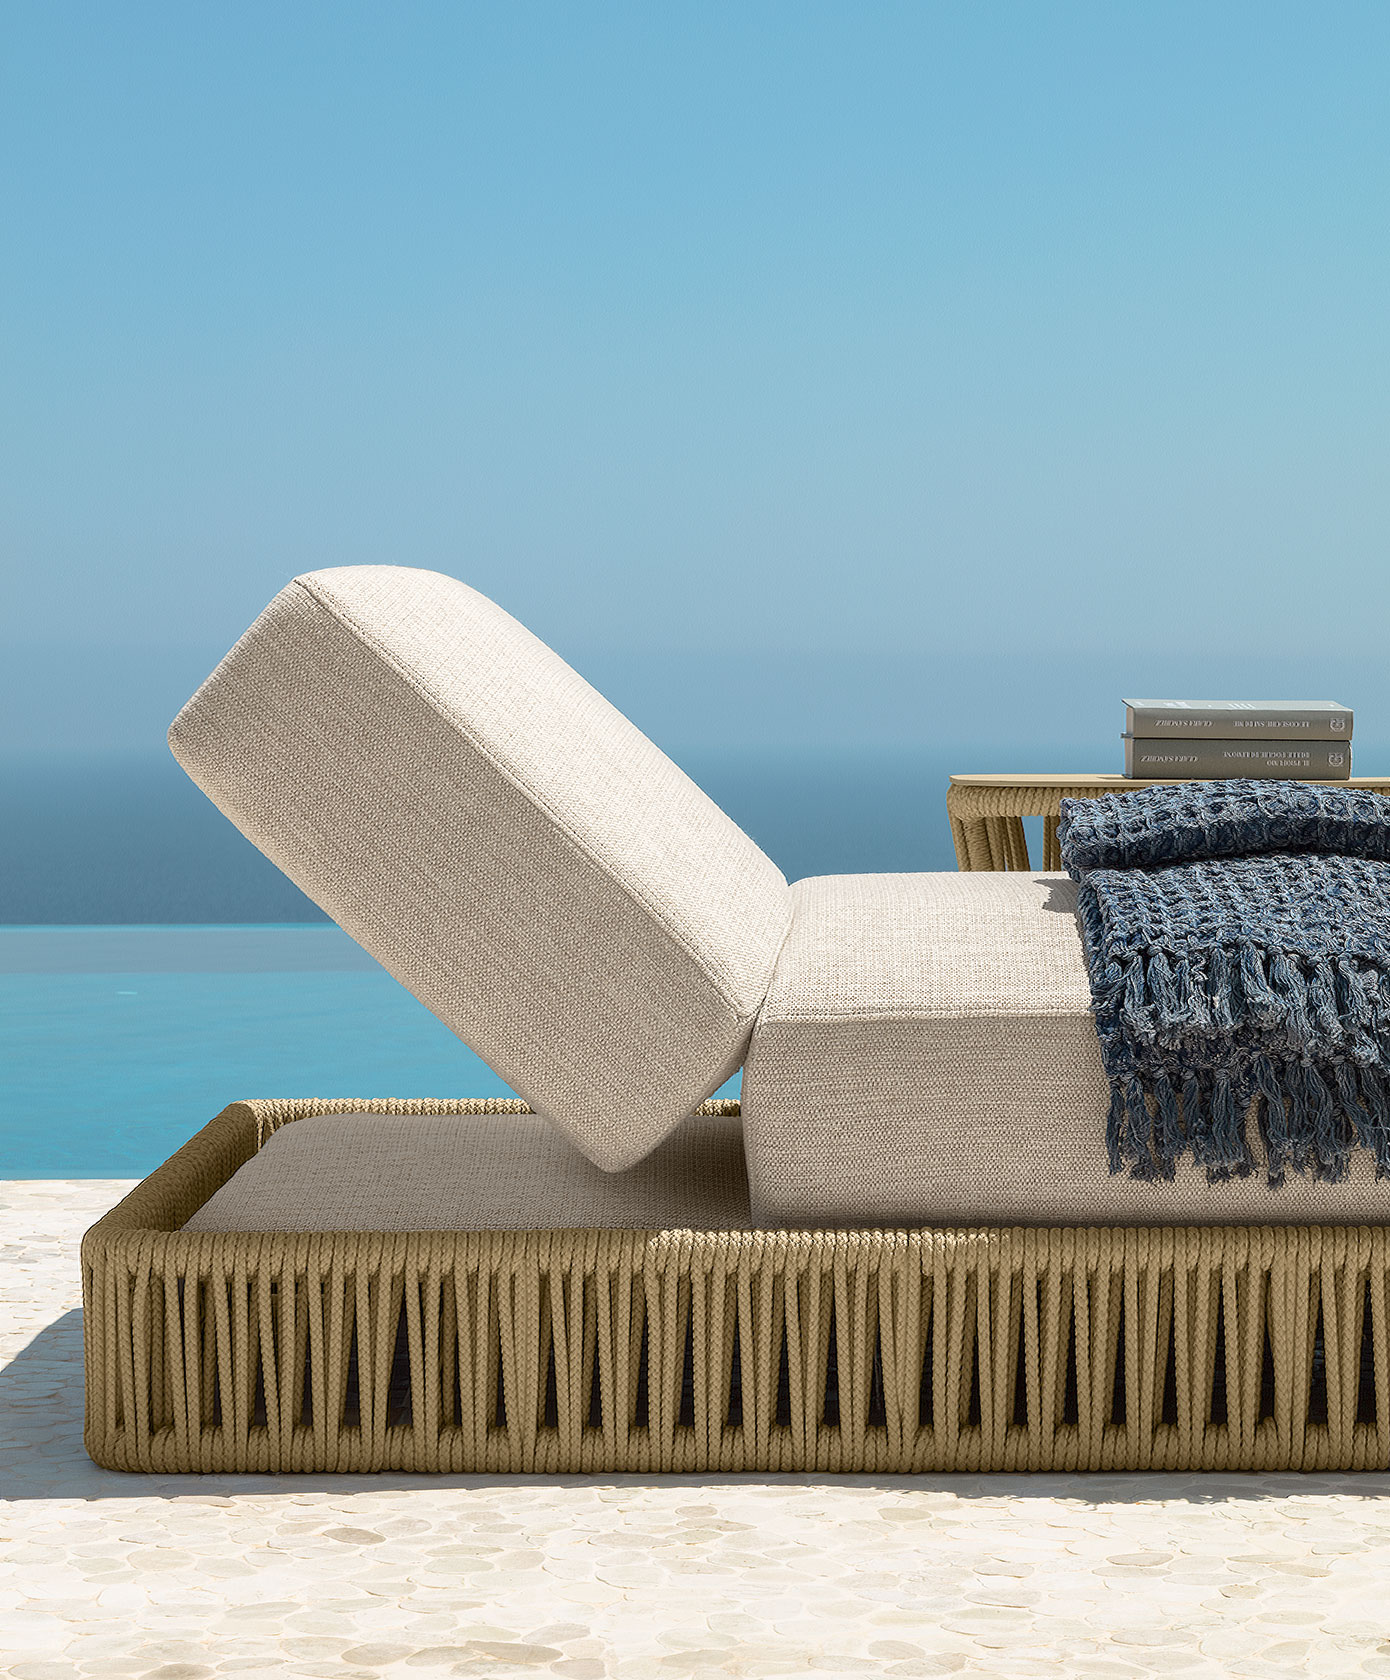 An outdoor lounger for the most demanding people. Ludovica and Roberto Palomba created a magnificent luxurious sunbed. Online shopping and free delivery.